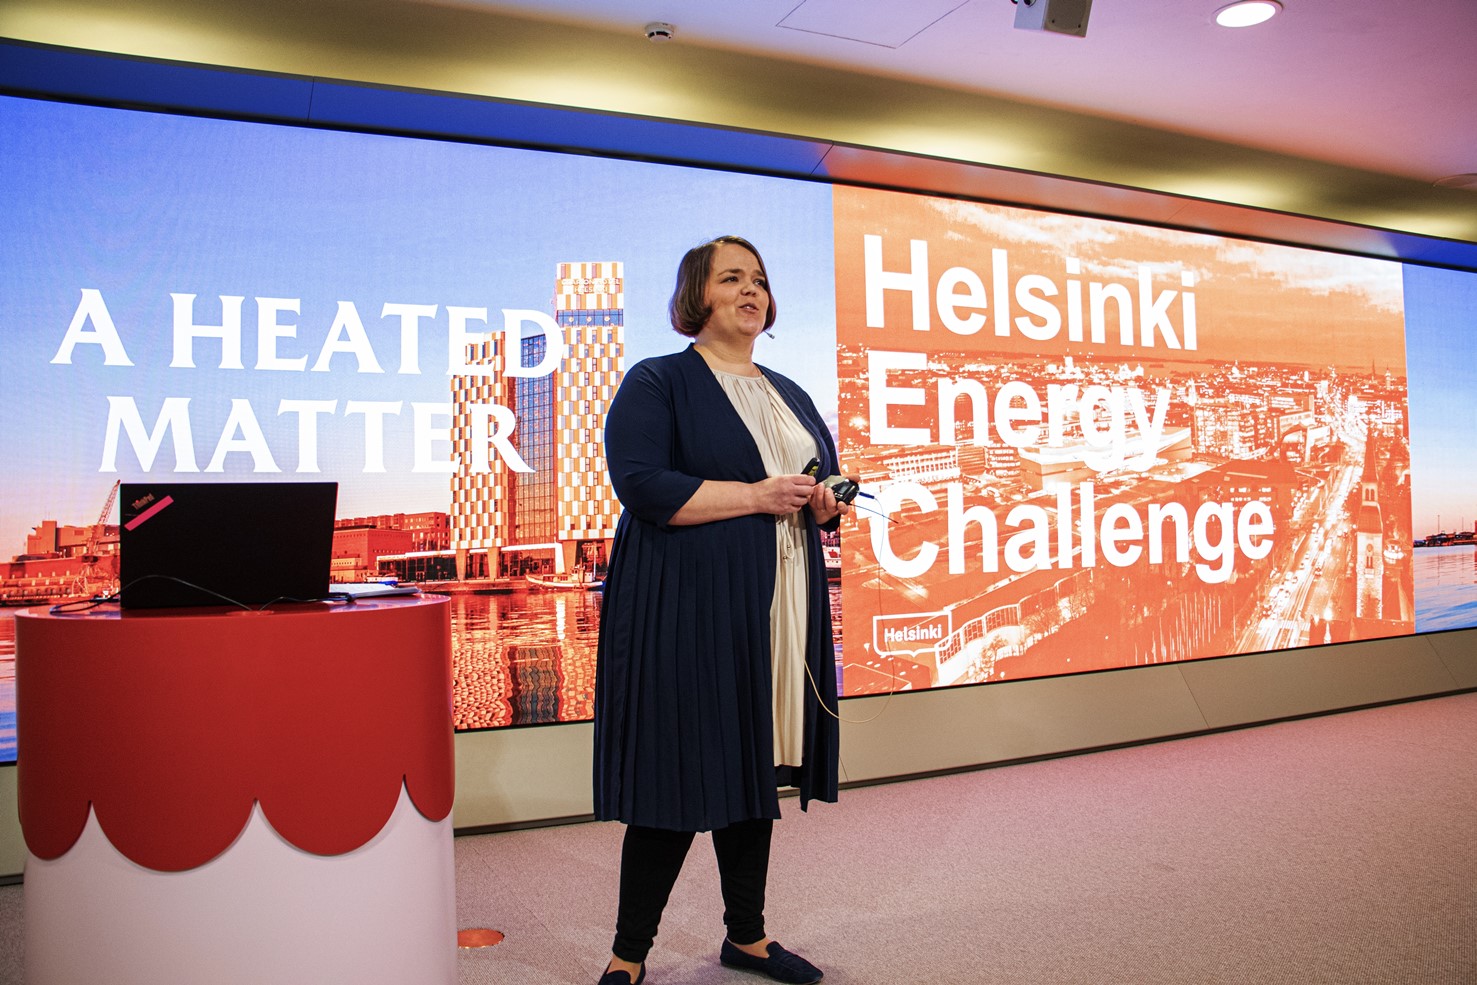 Winners named in Helsinki Energy Challenge for carbon-neutral district heat